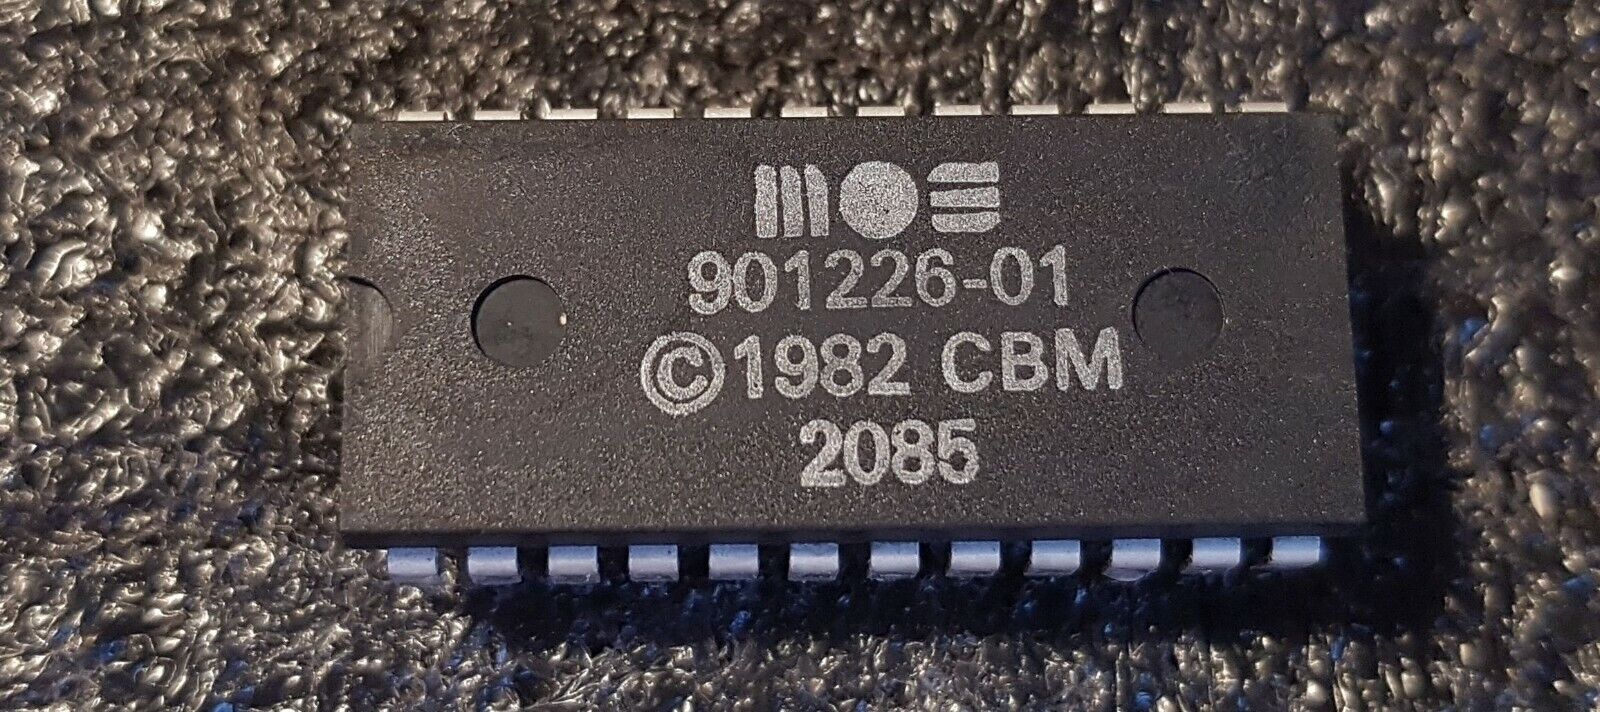 MOS 901226-01 BASIC ROM Chip, IC for Commodore 64, Tested and Working.